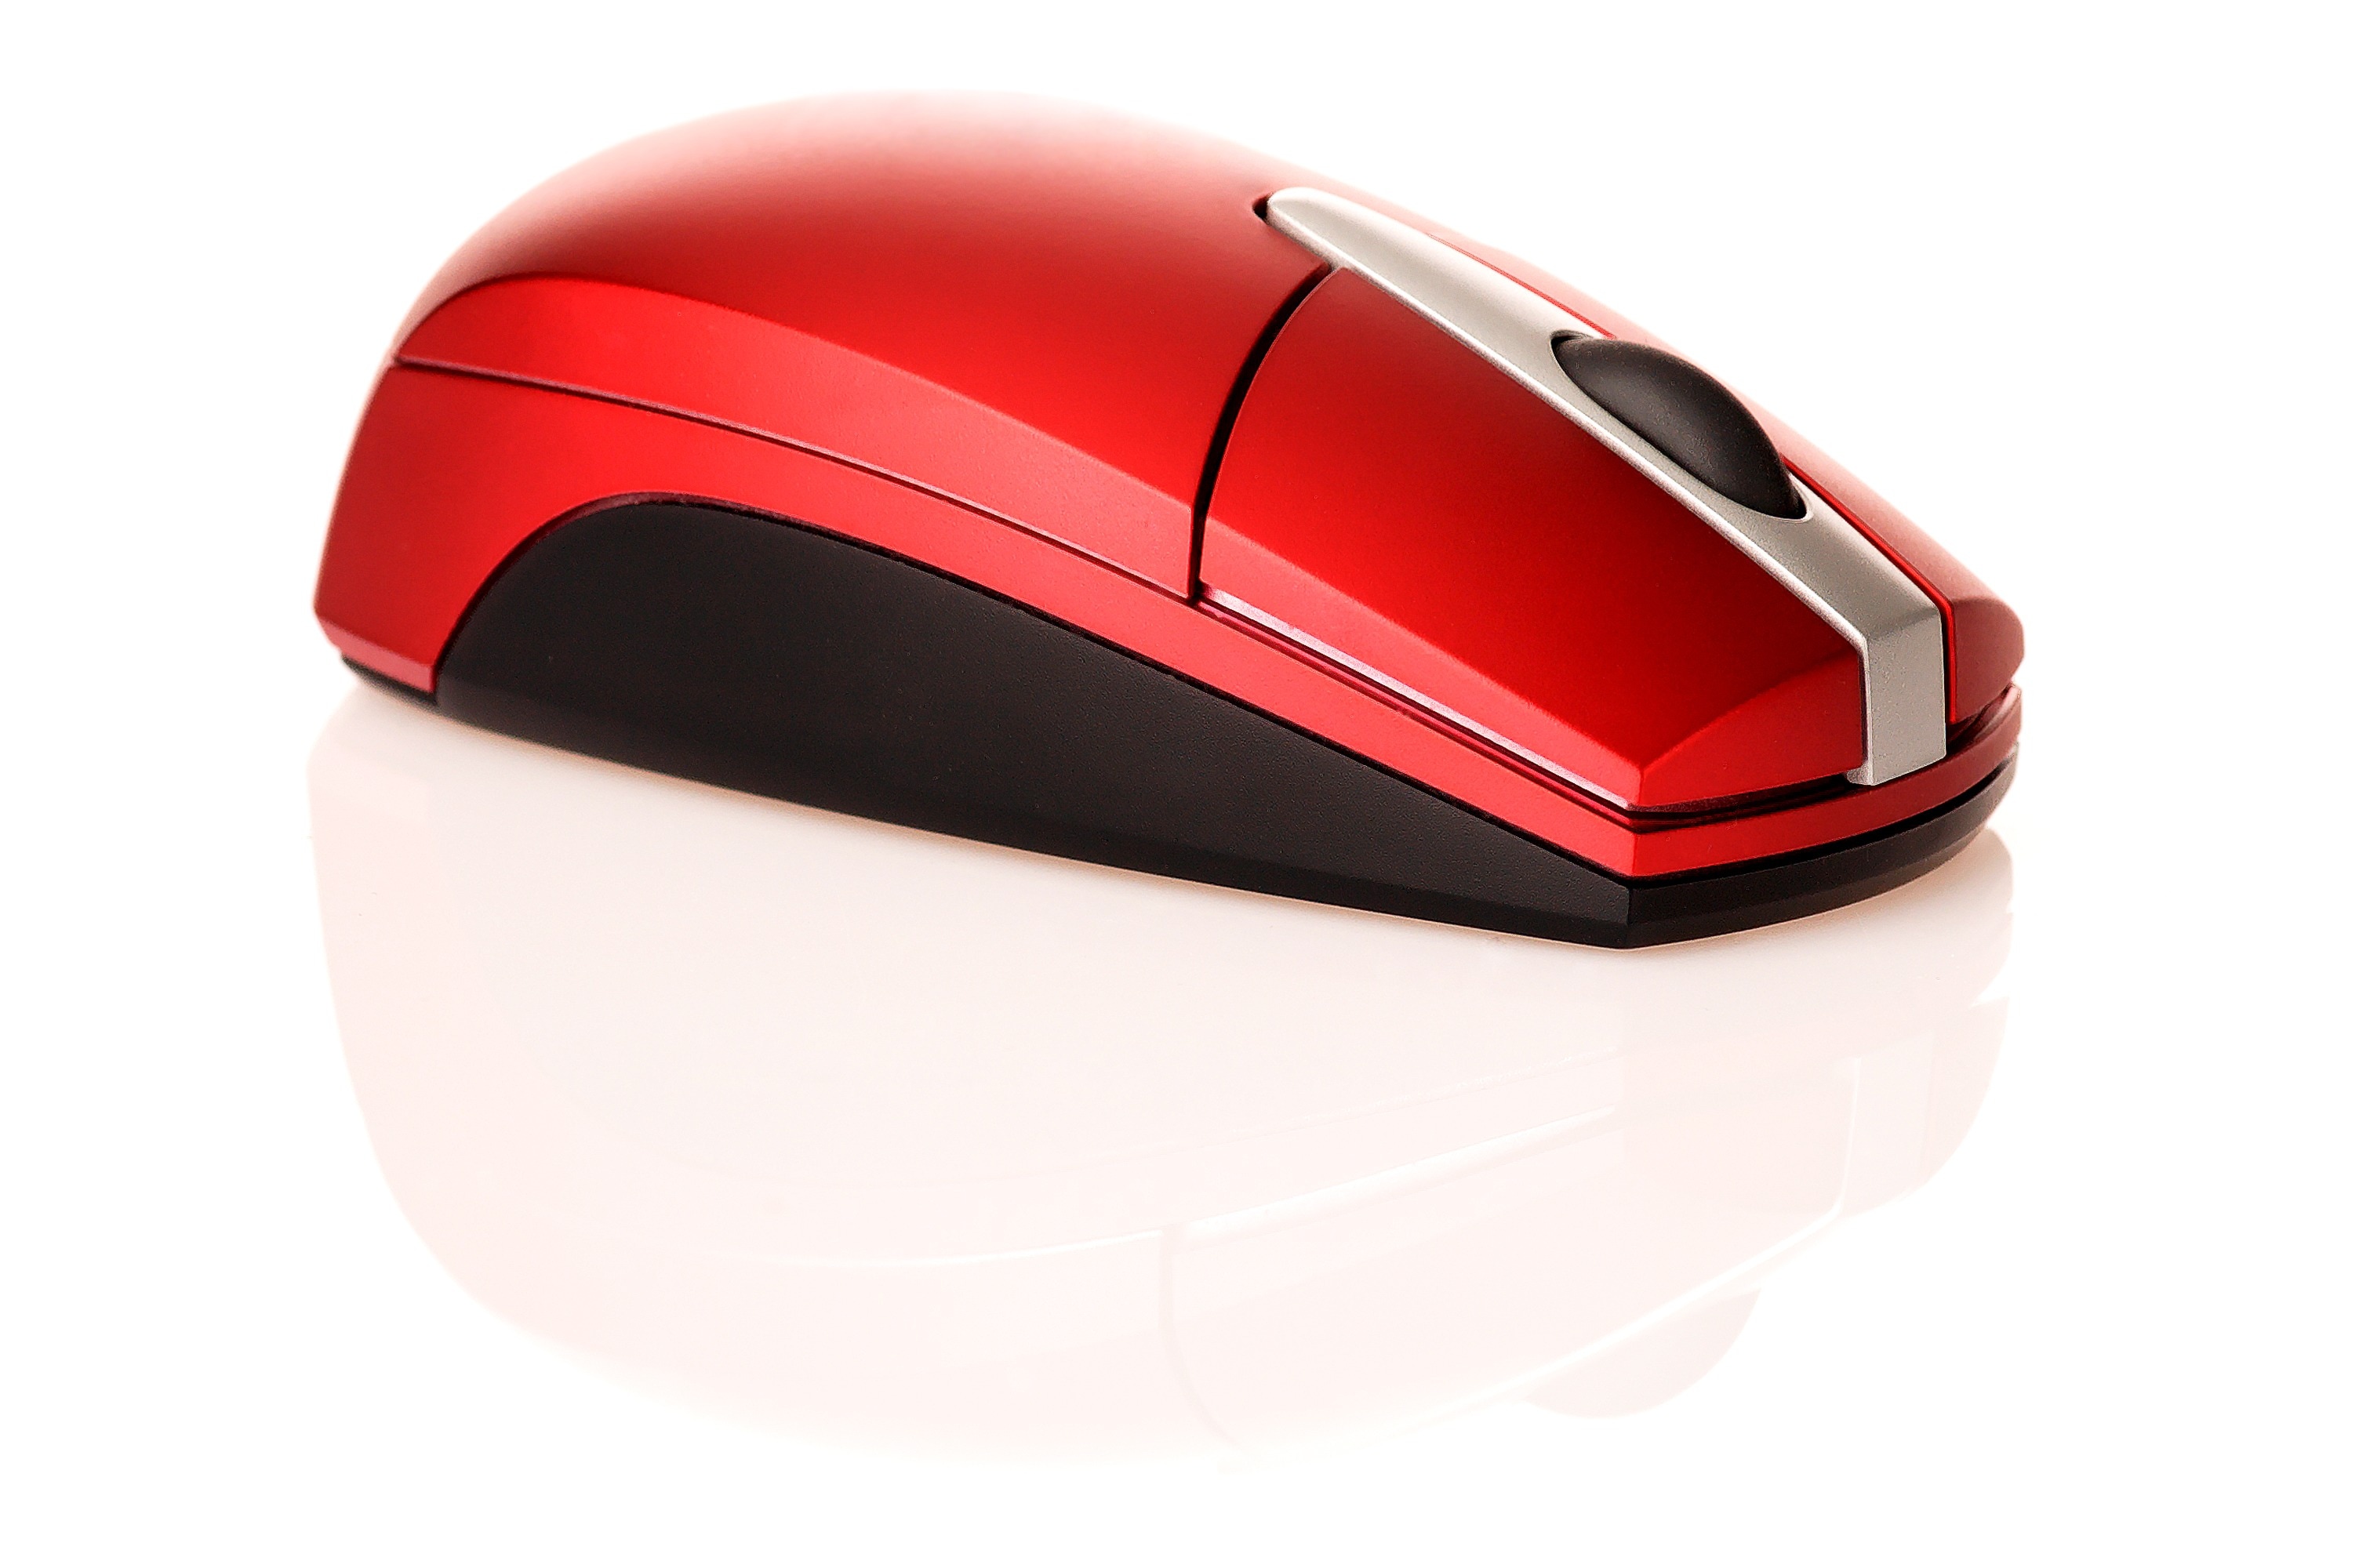 red and black cordless computer mouse